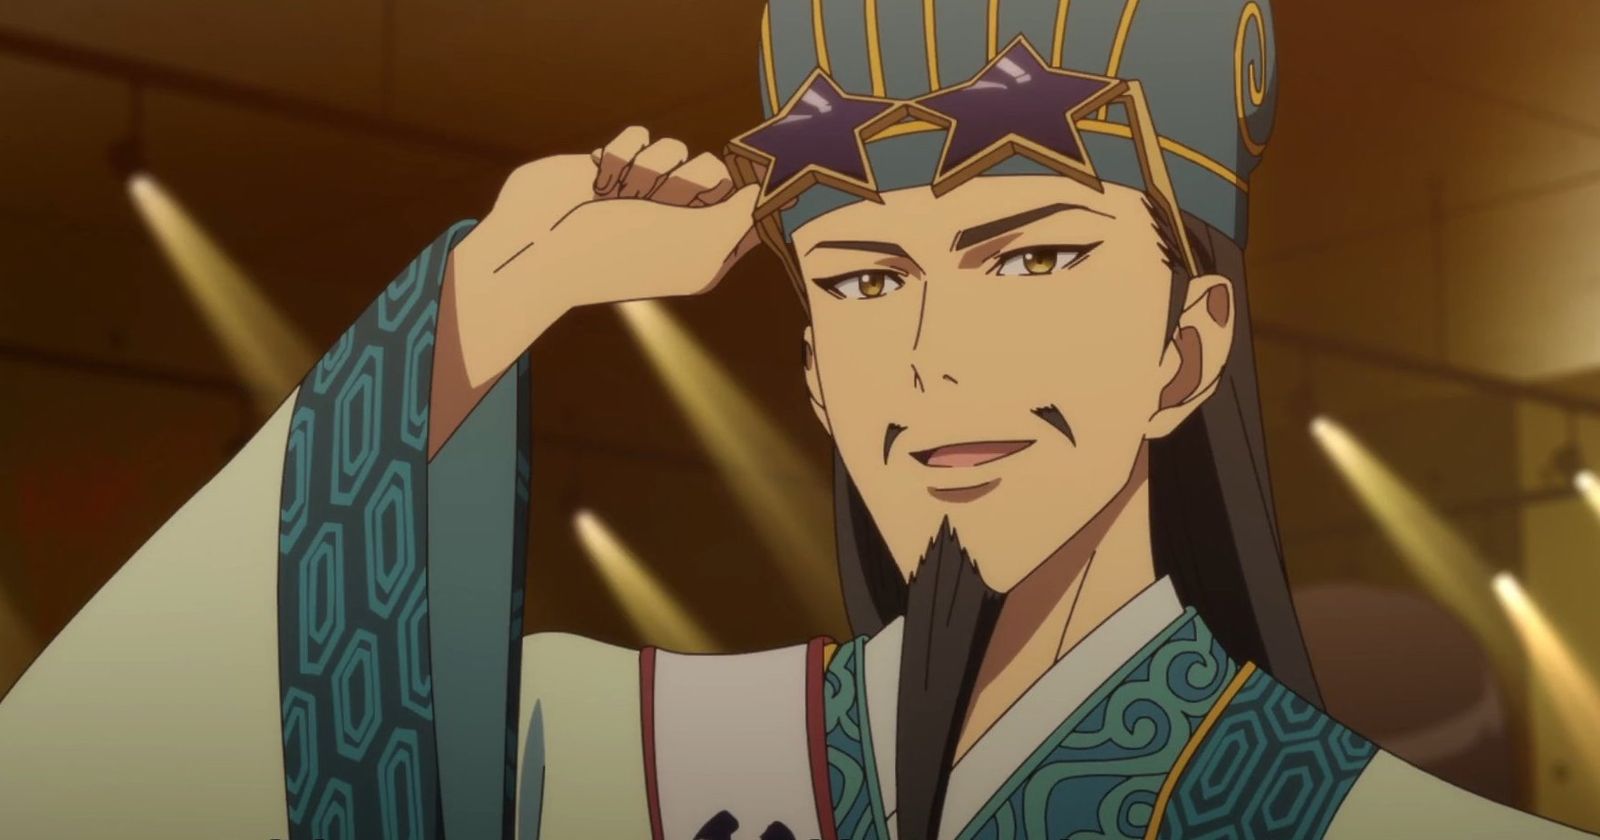 Why Ya Boy Kongming! is one of the most underrated anime